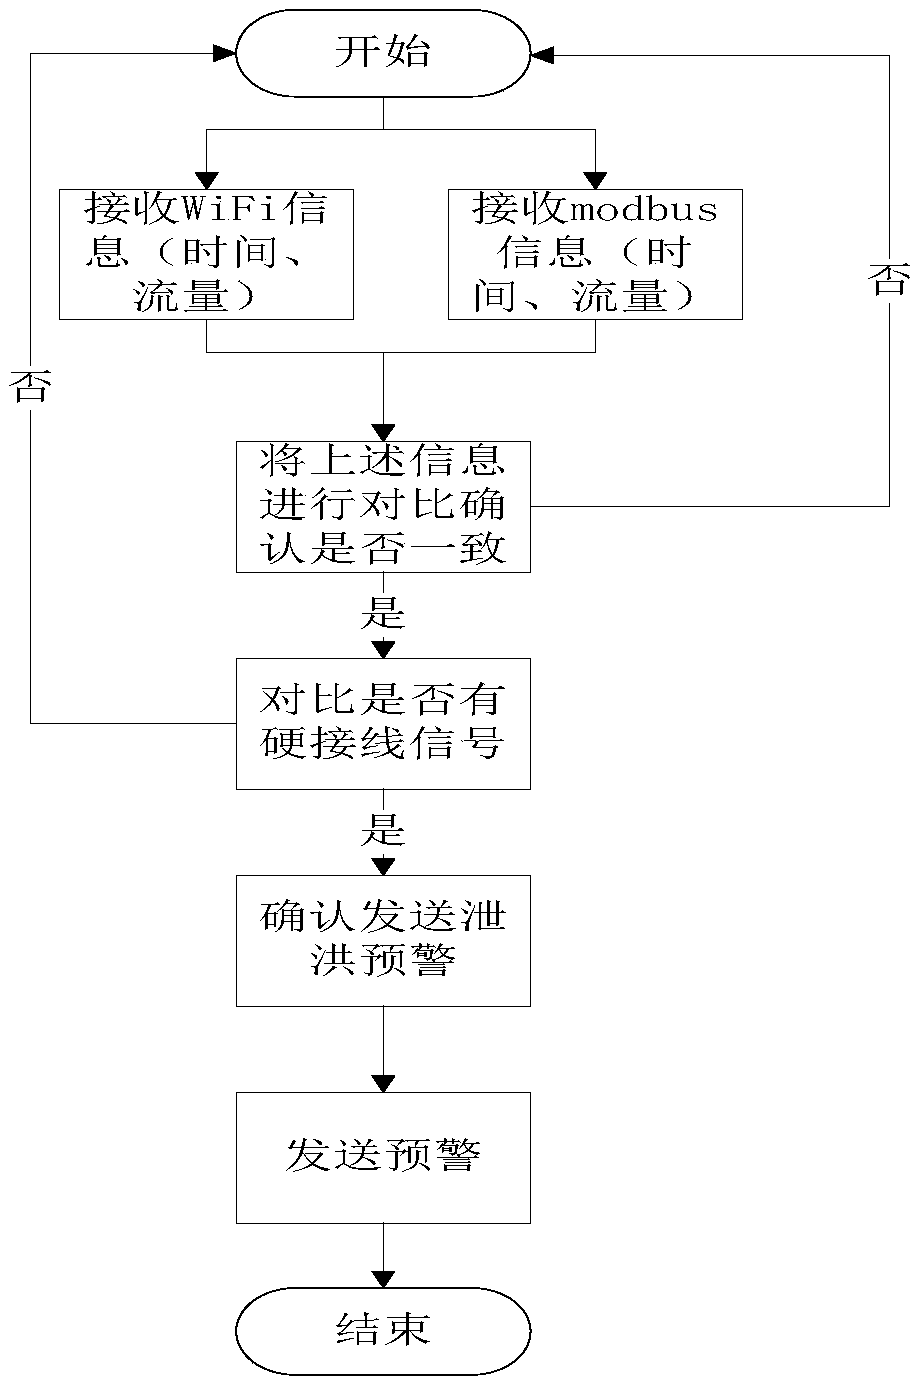 Water level prediction analysis and control method of a hydropower station reservoir